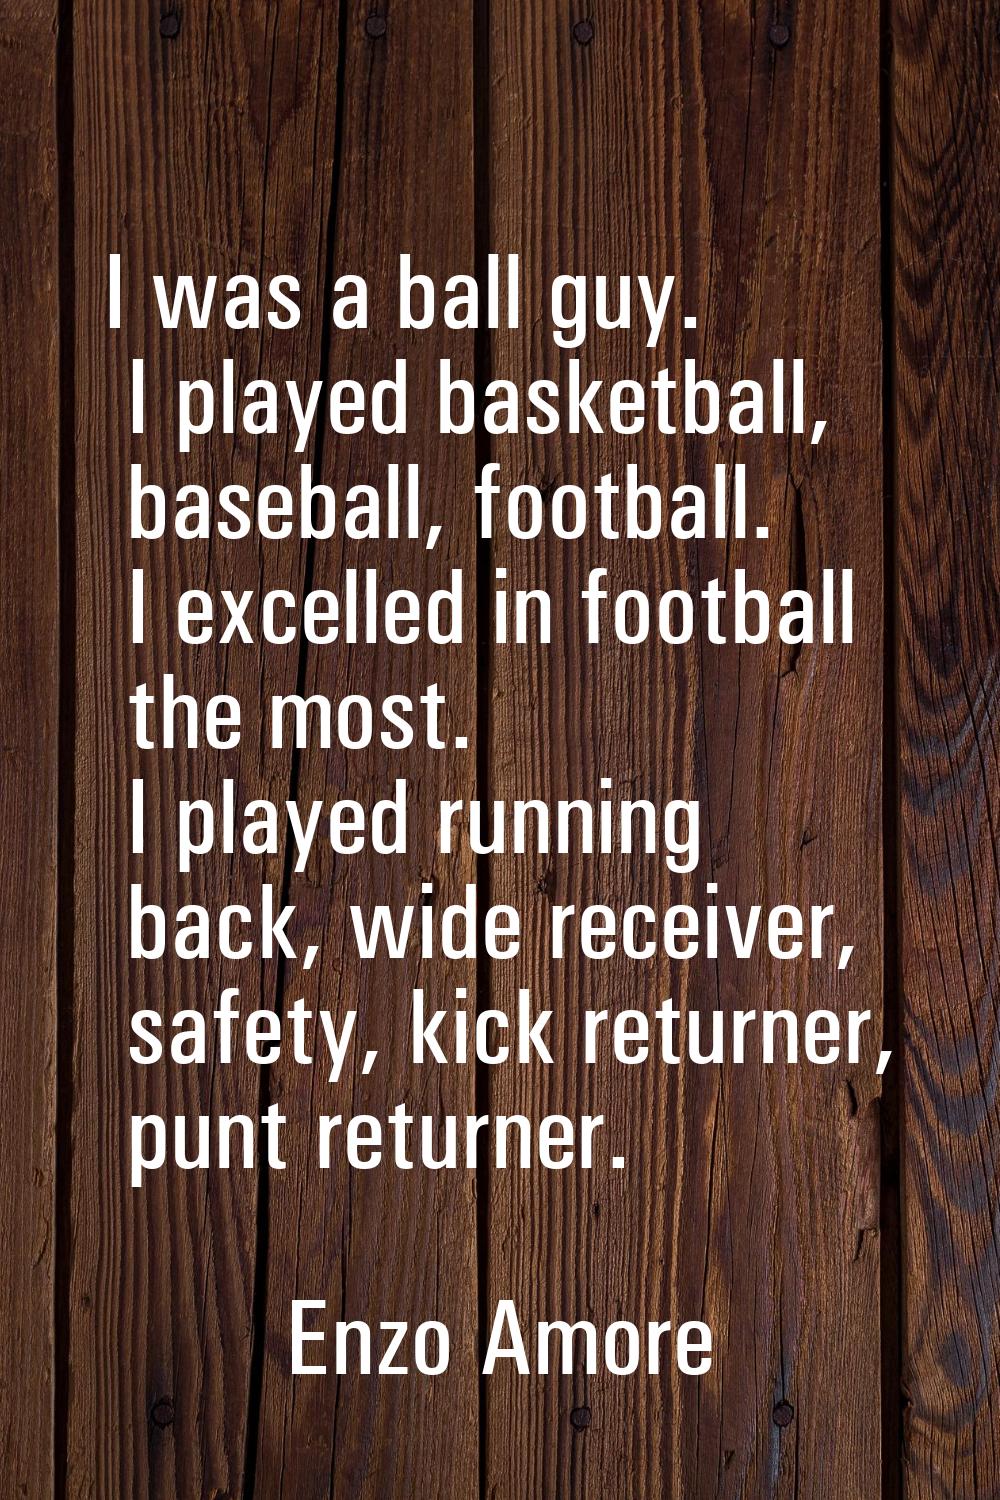 I was a ball guy. I played basketball, baseball, football. I excelled in football the most. I playe